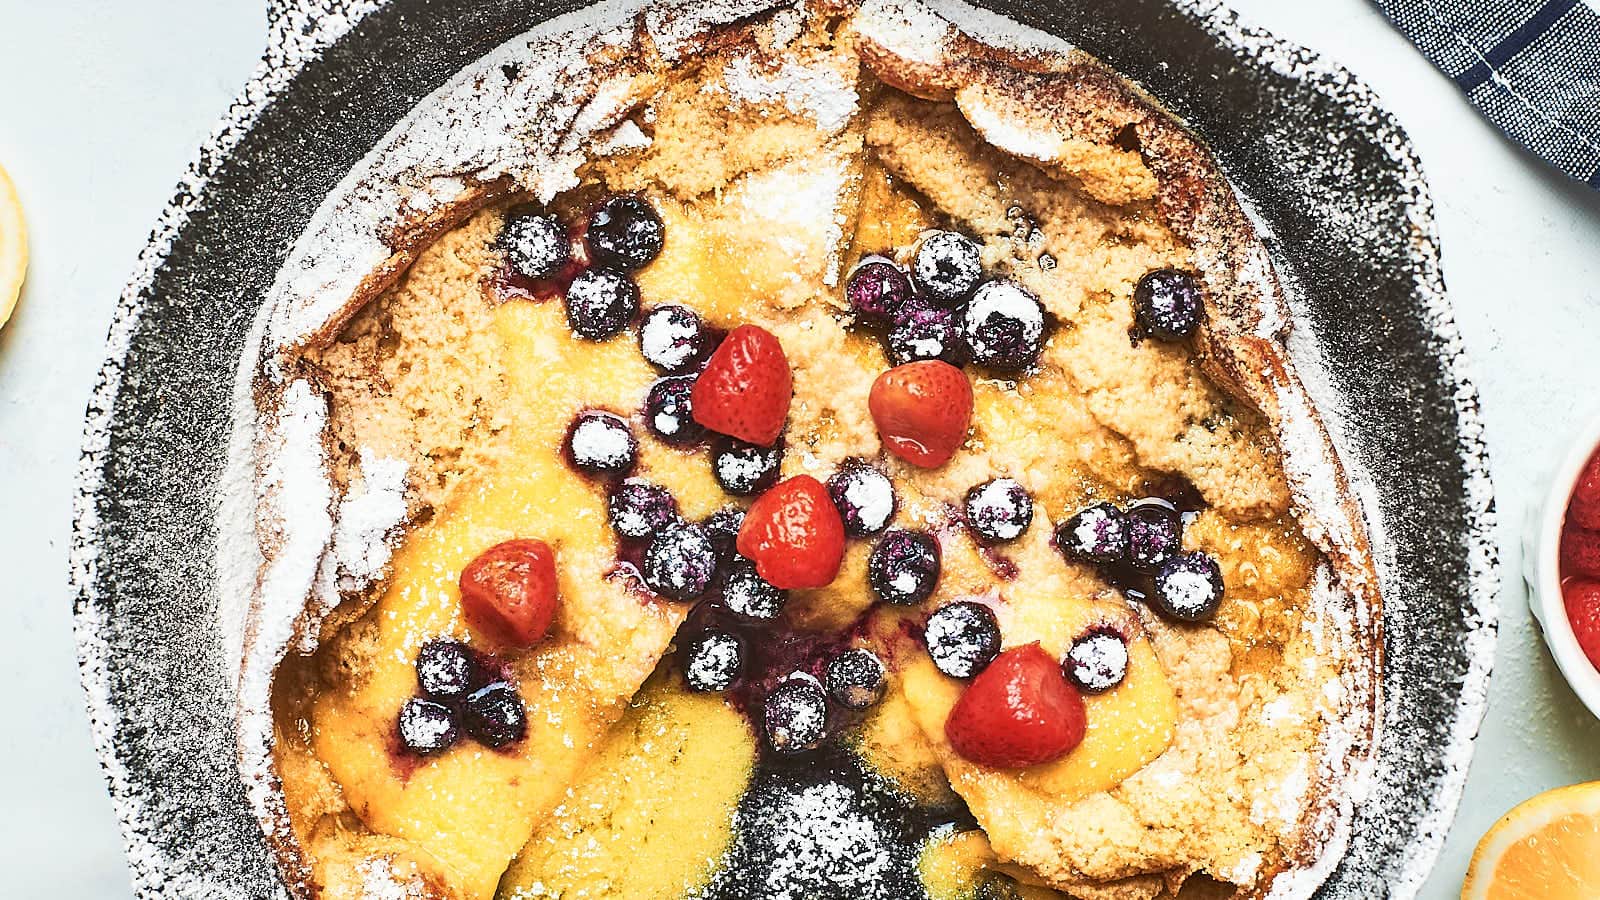 Dutch Baby Pancake recipe by Cheerful Cook.